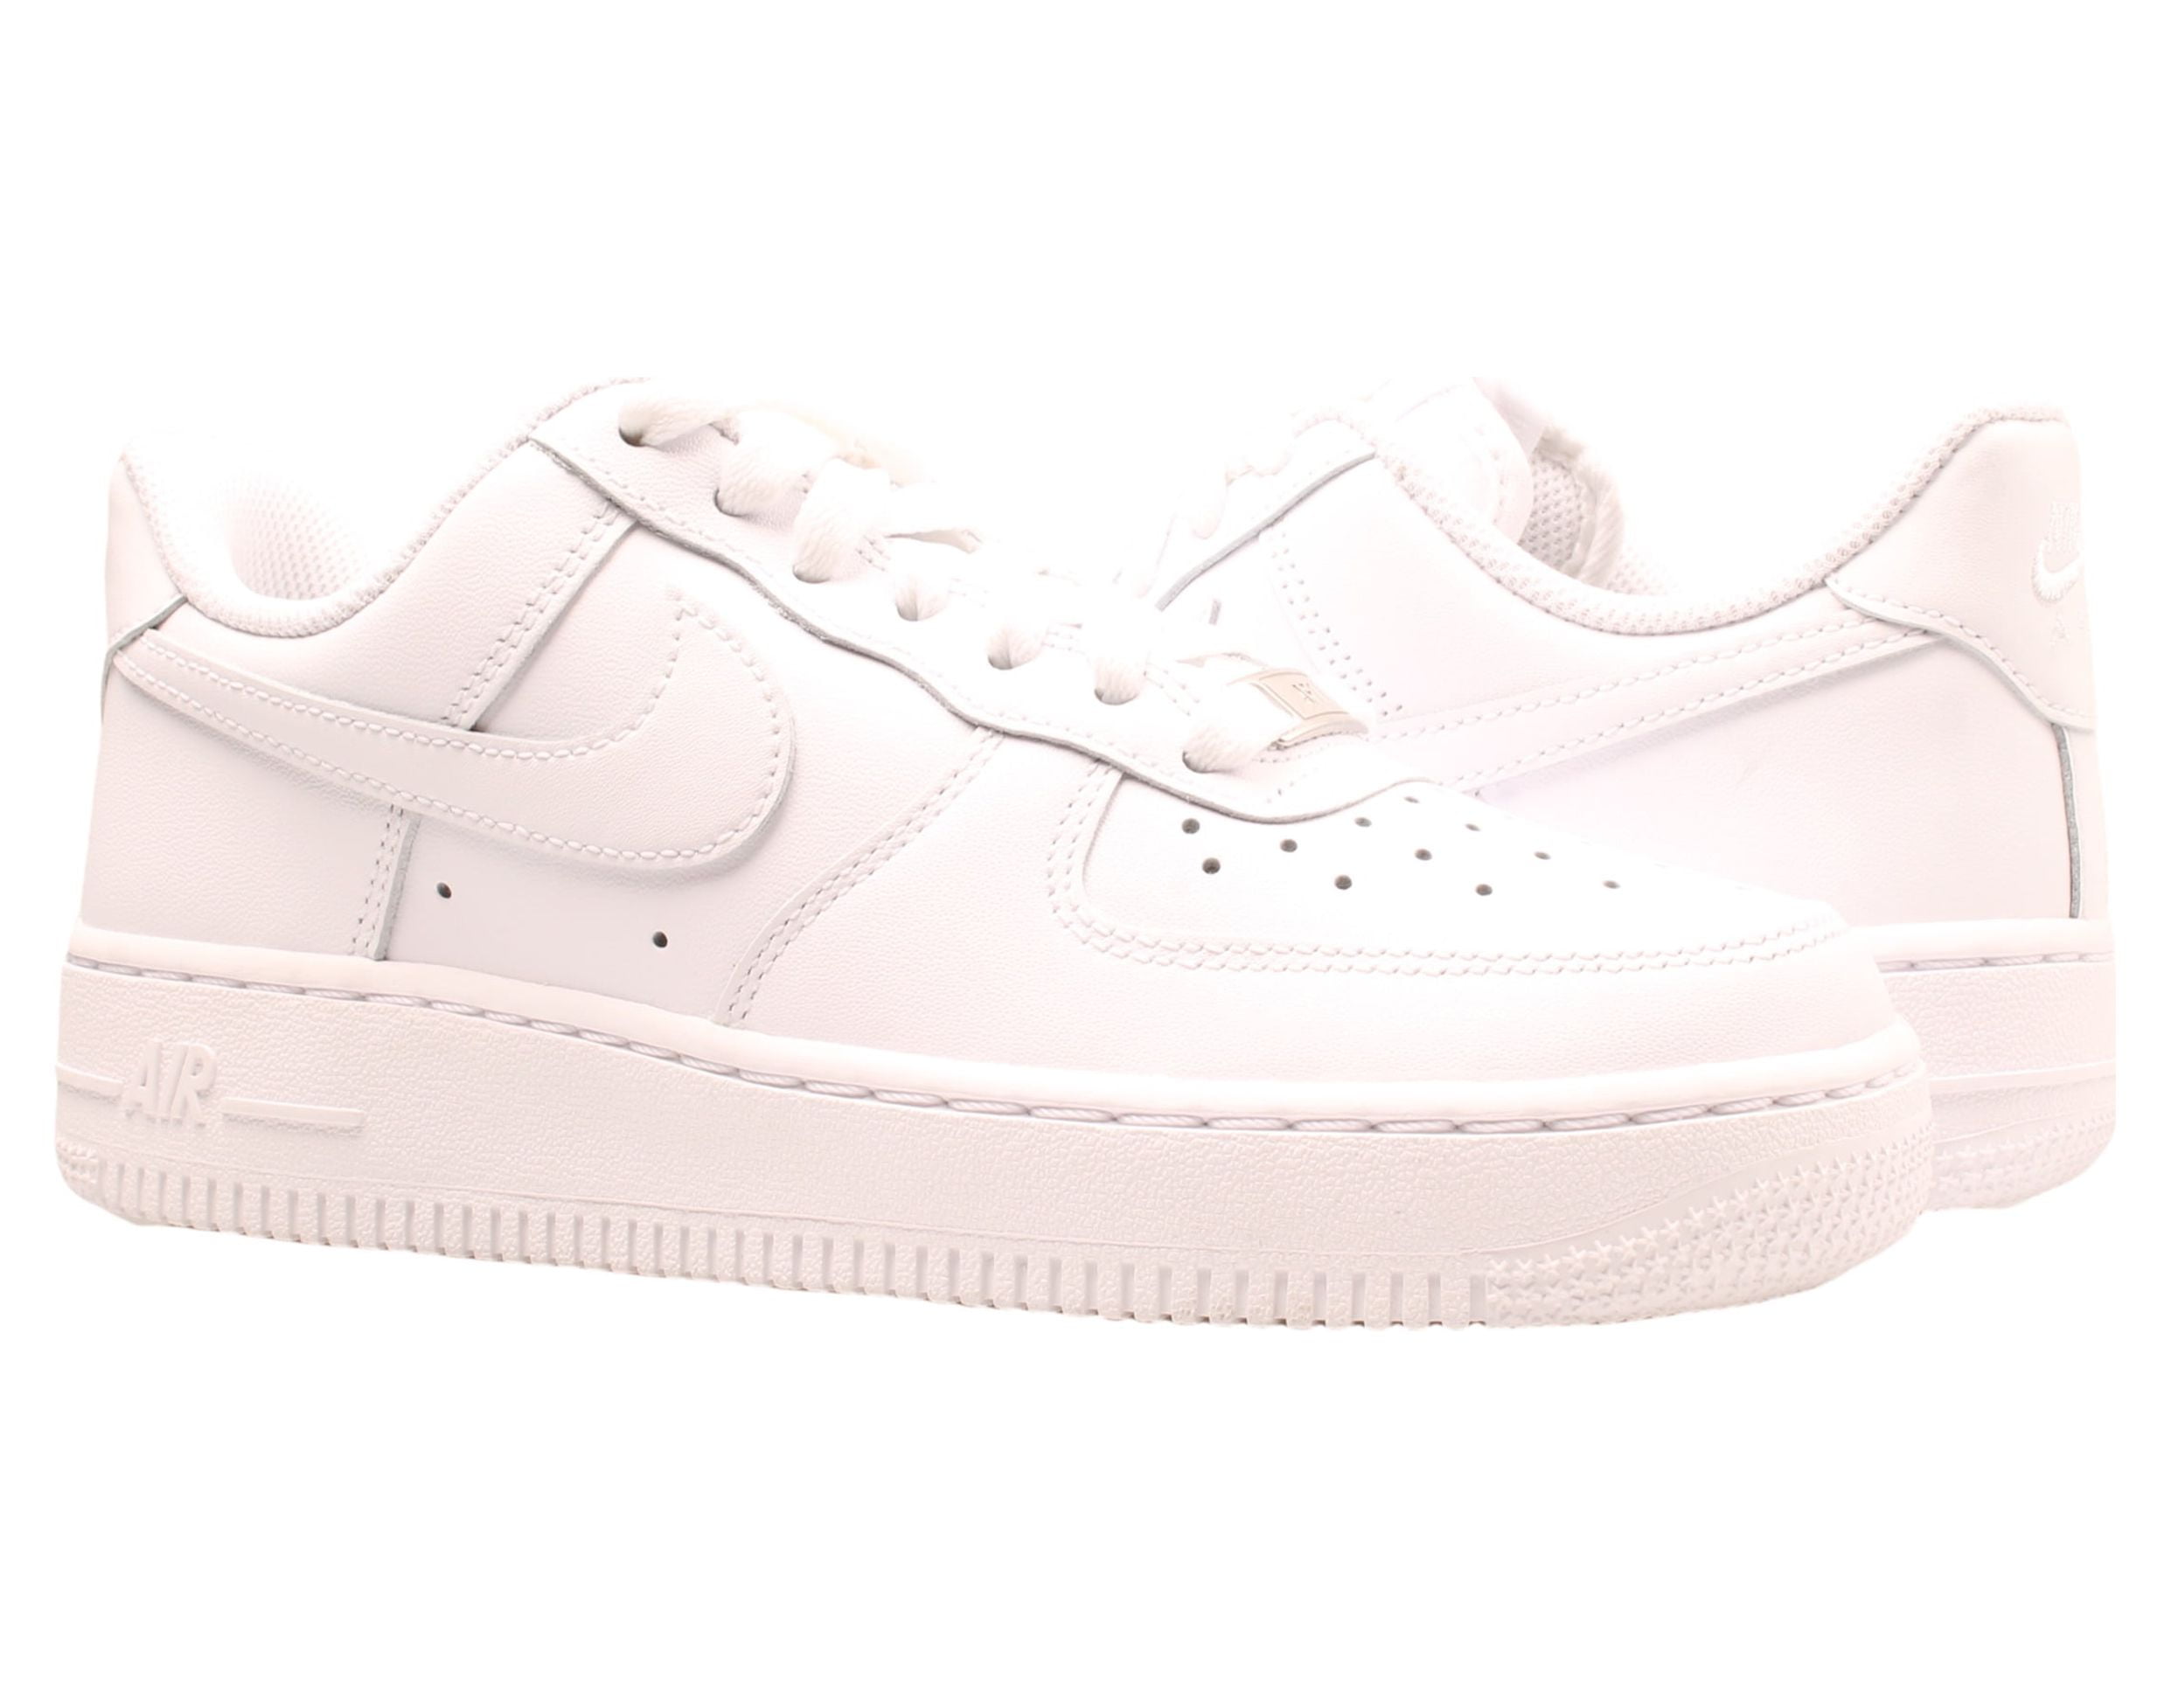 Nike Women's Air Force 1 Low '07 Shoes